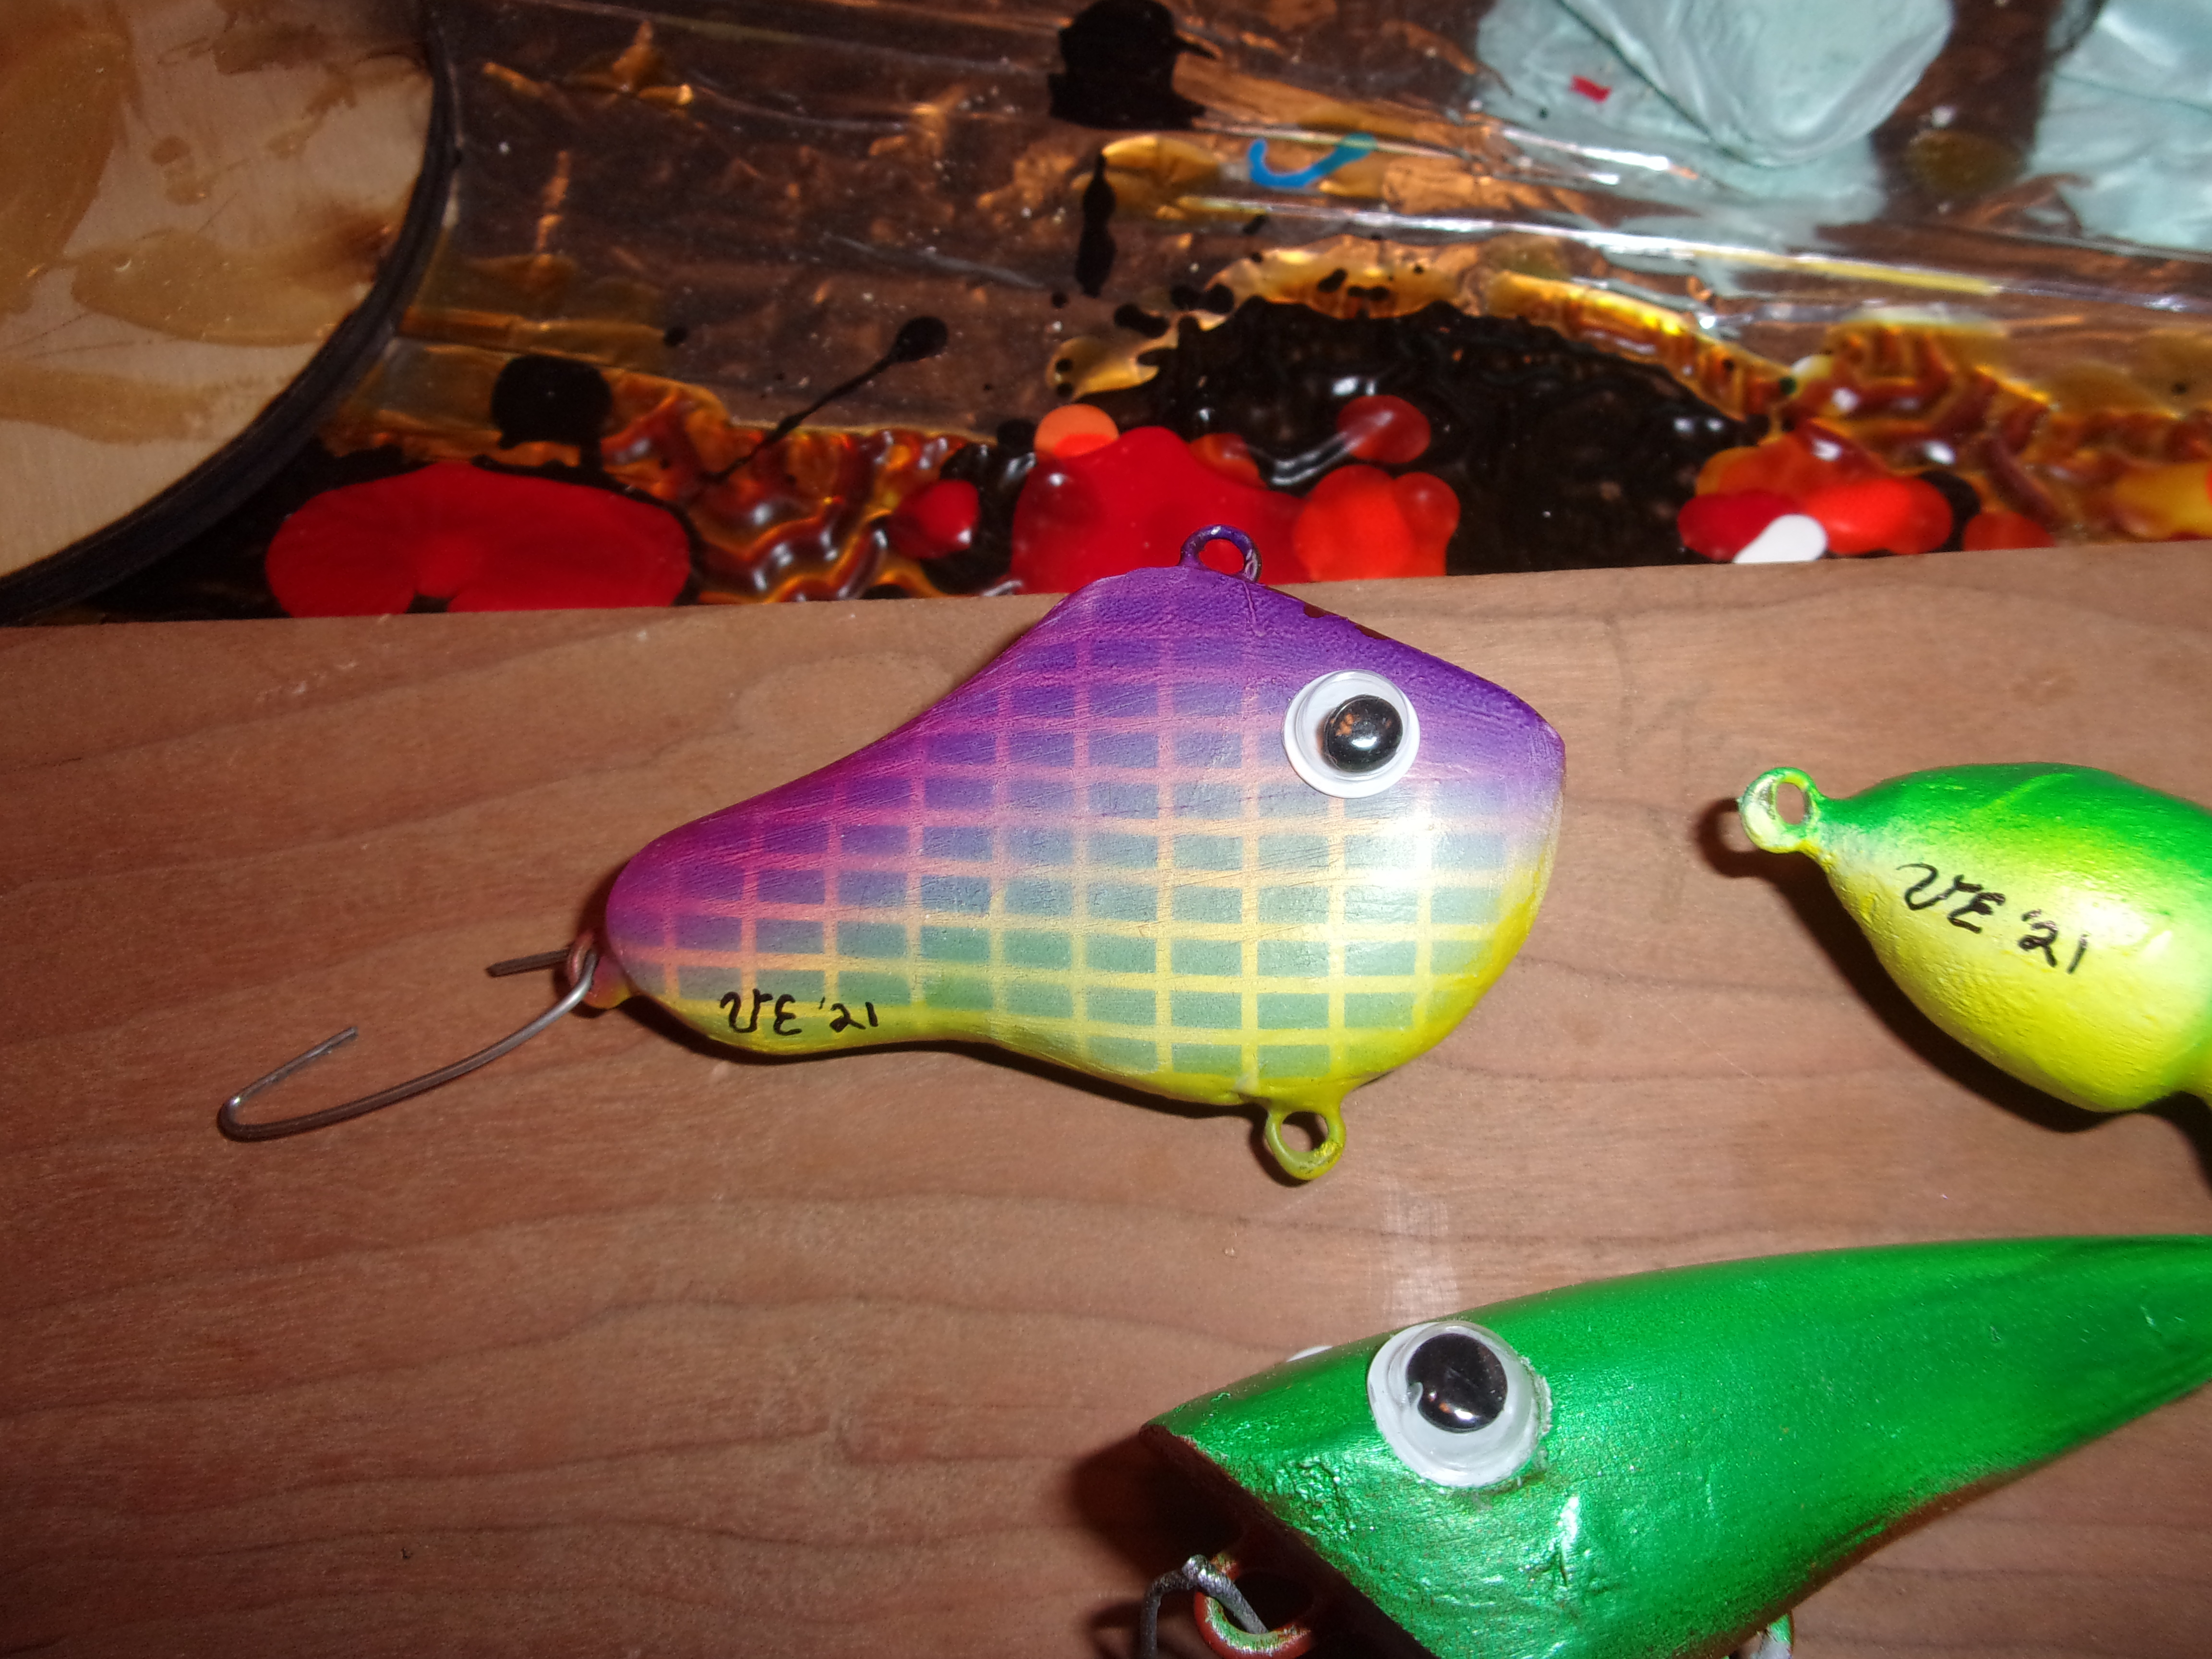 Best Brand or Type of airbrush paint for Painting hard bait